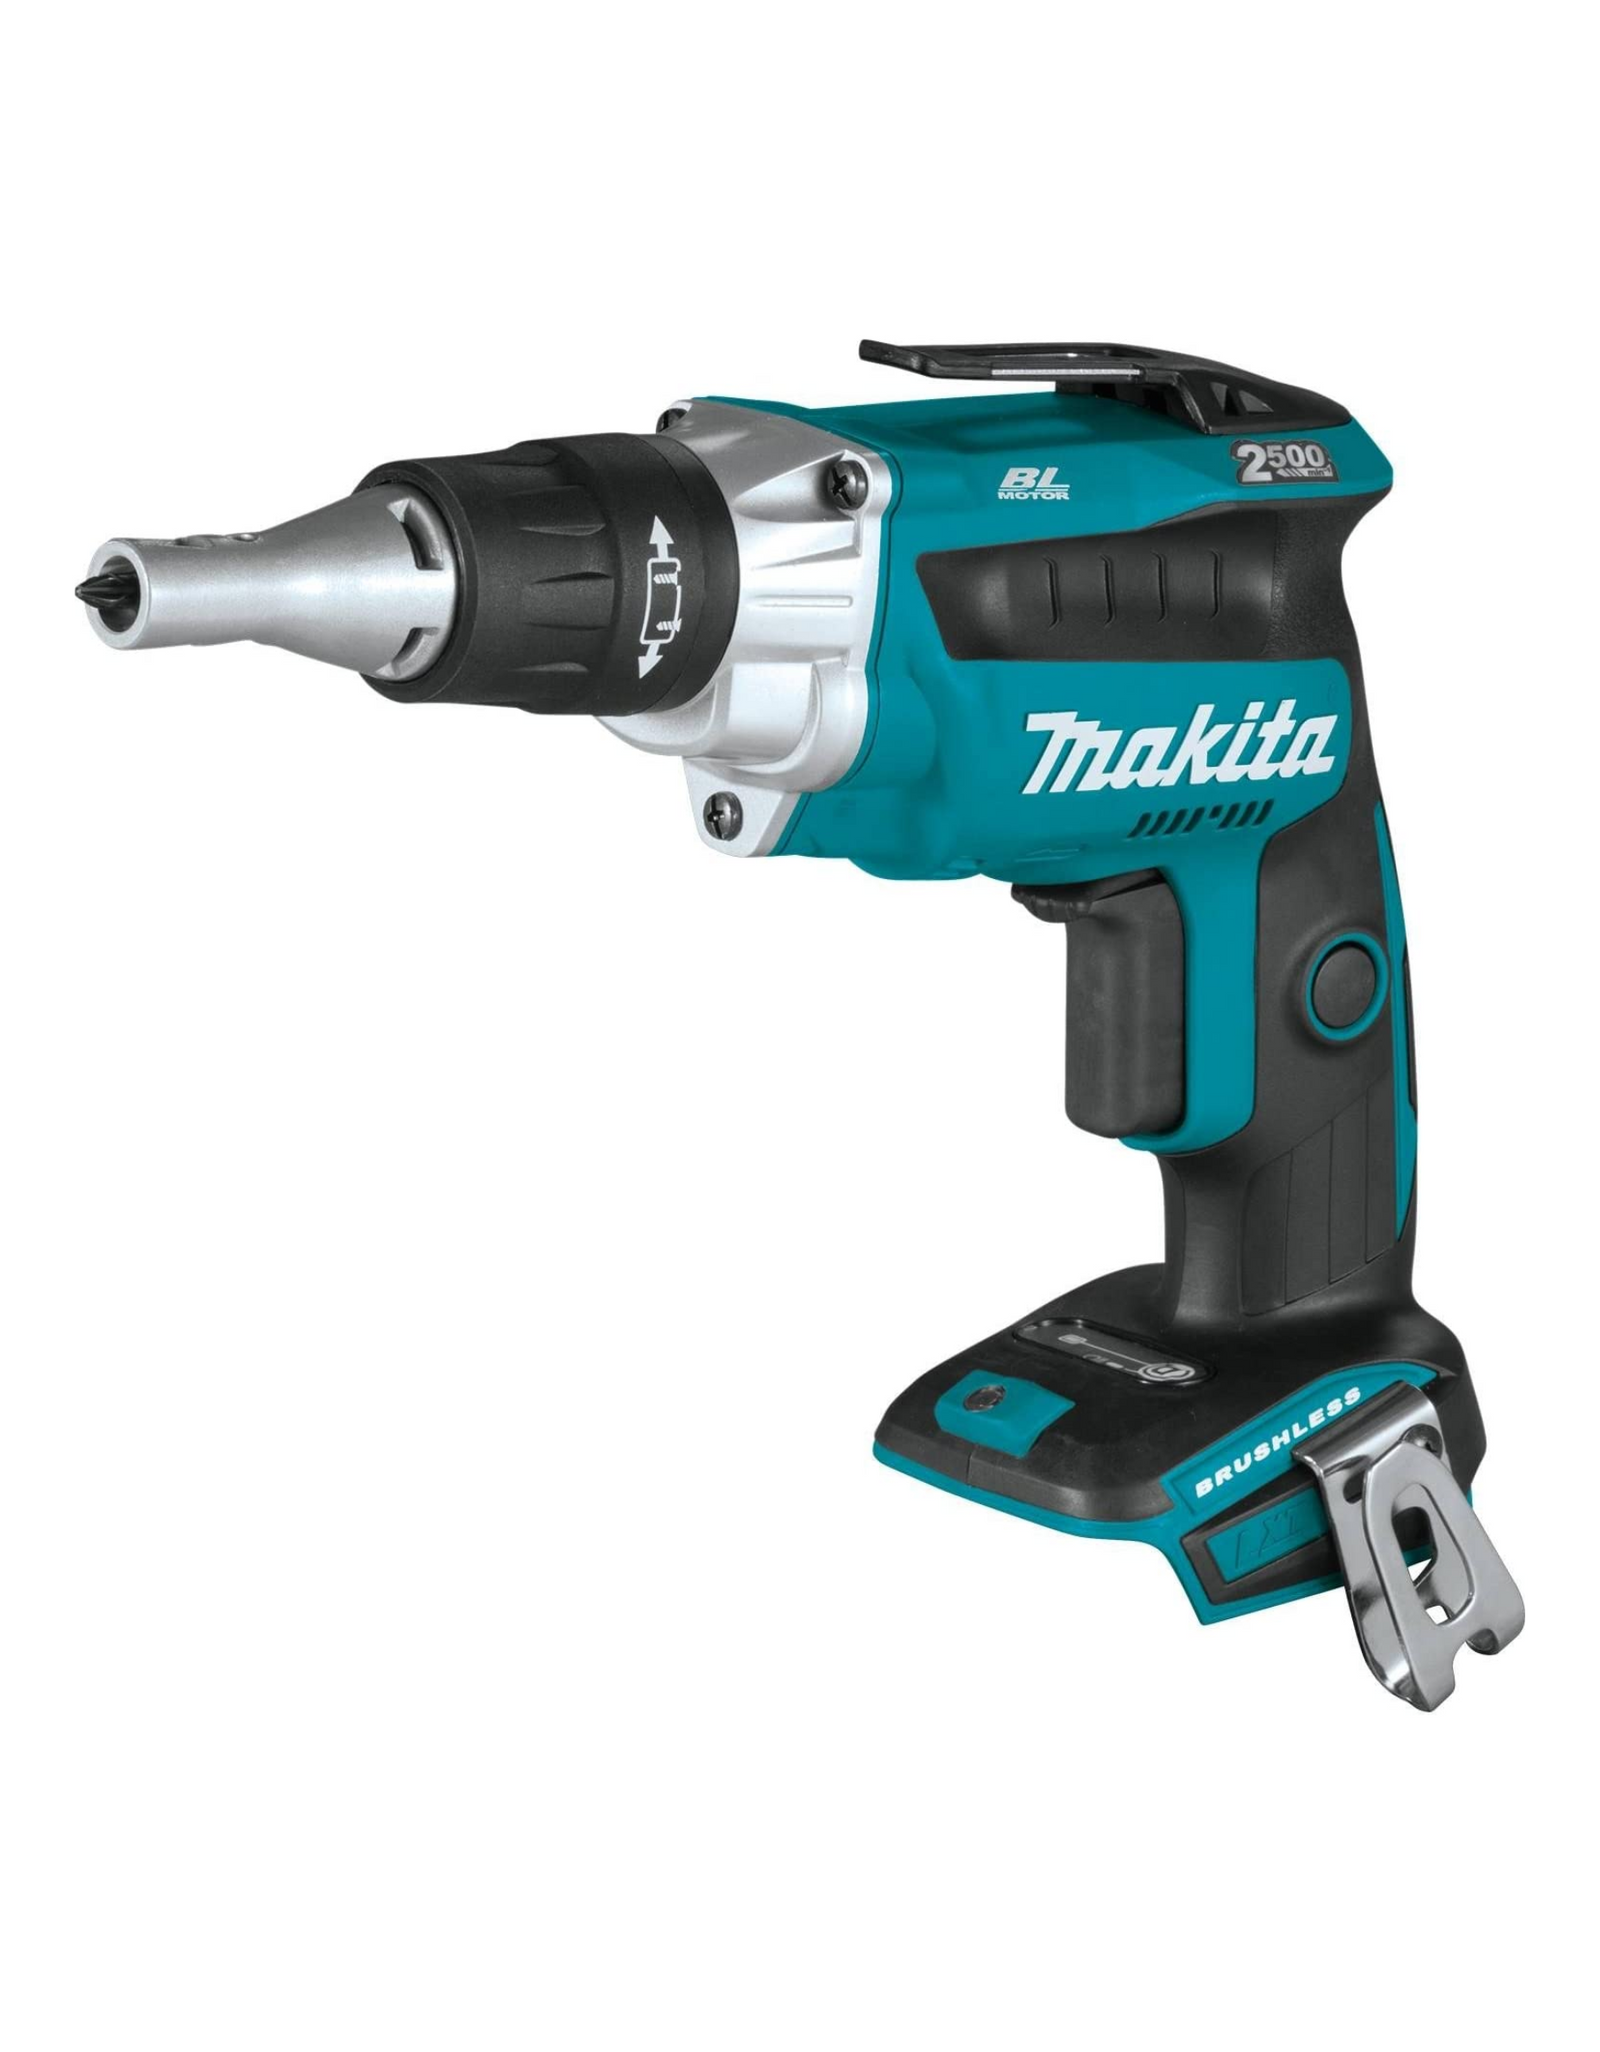 Makita XSF04Z 18V LXT Lithium-Ion Brushless Cordless 2,500 Rpm Drywall Screwdriver (Tool Only)